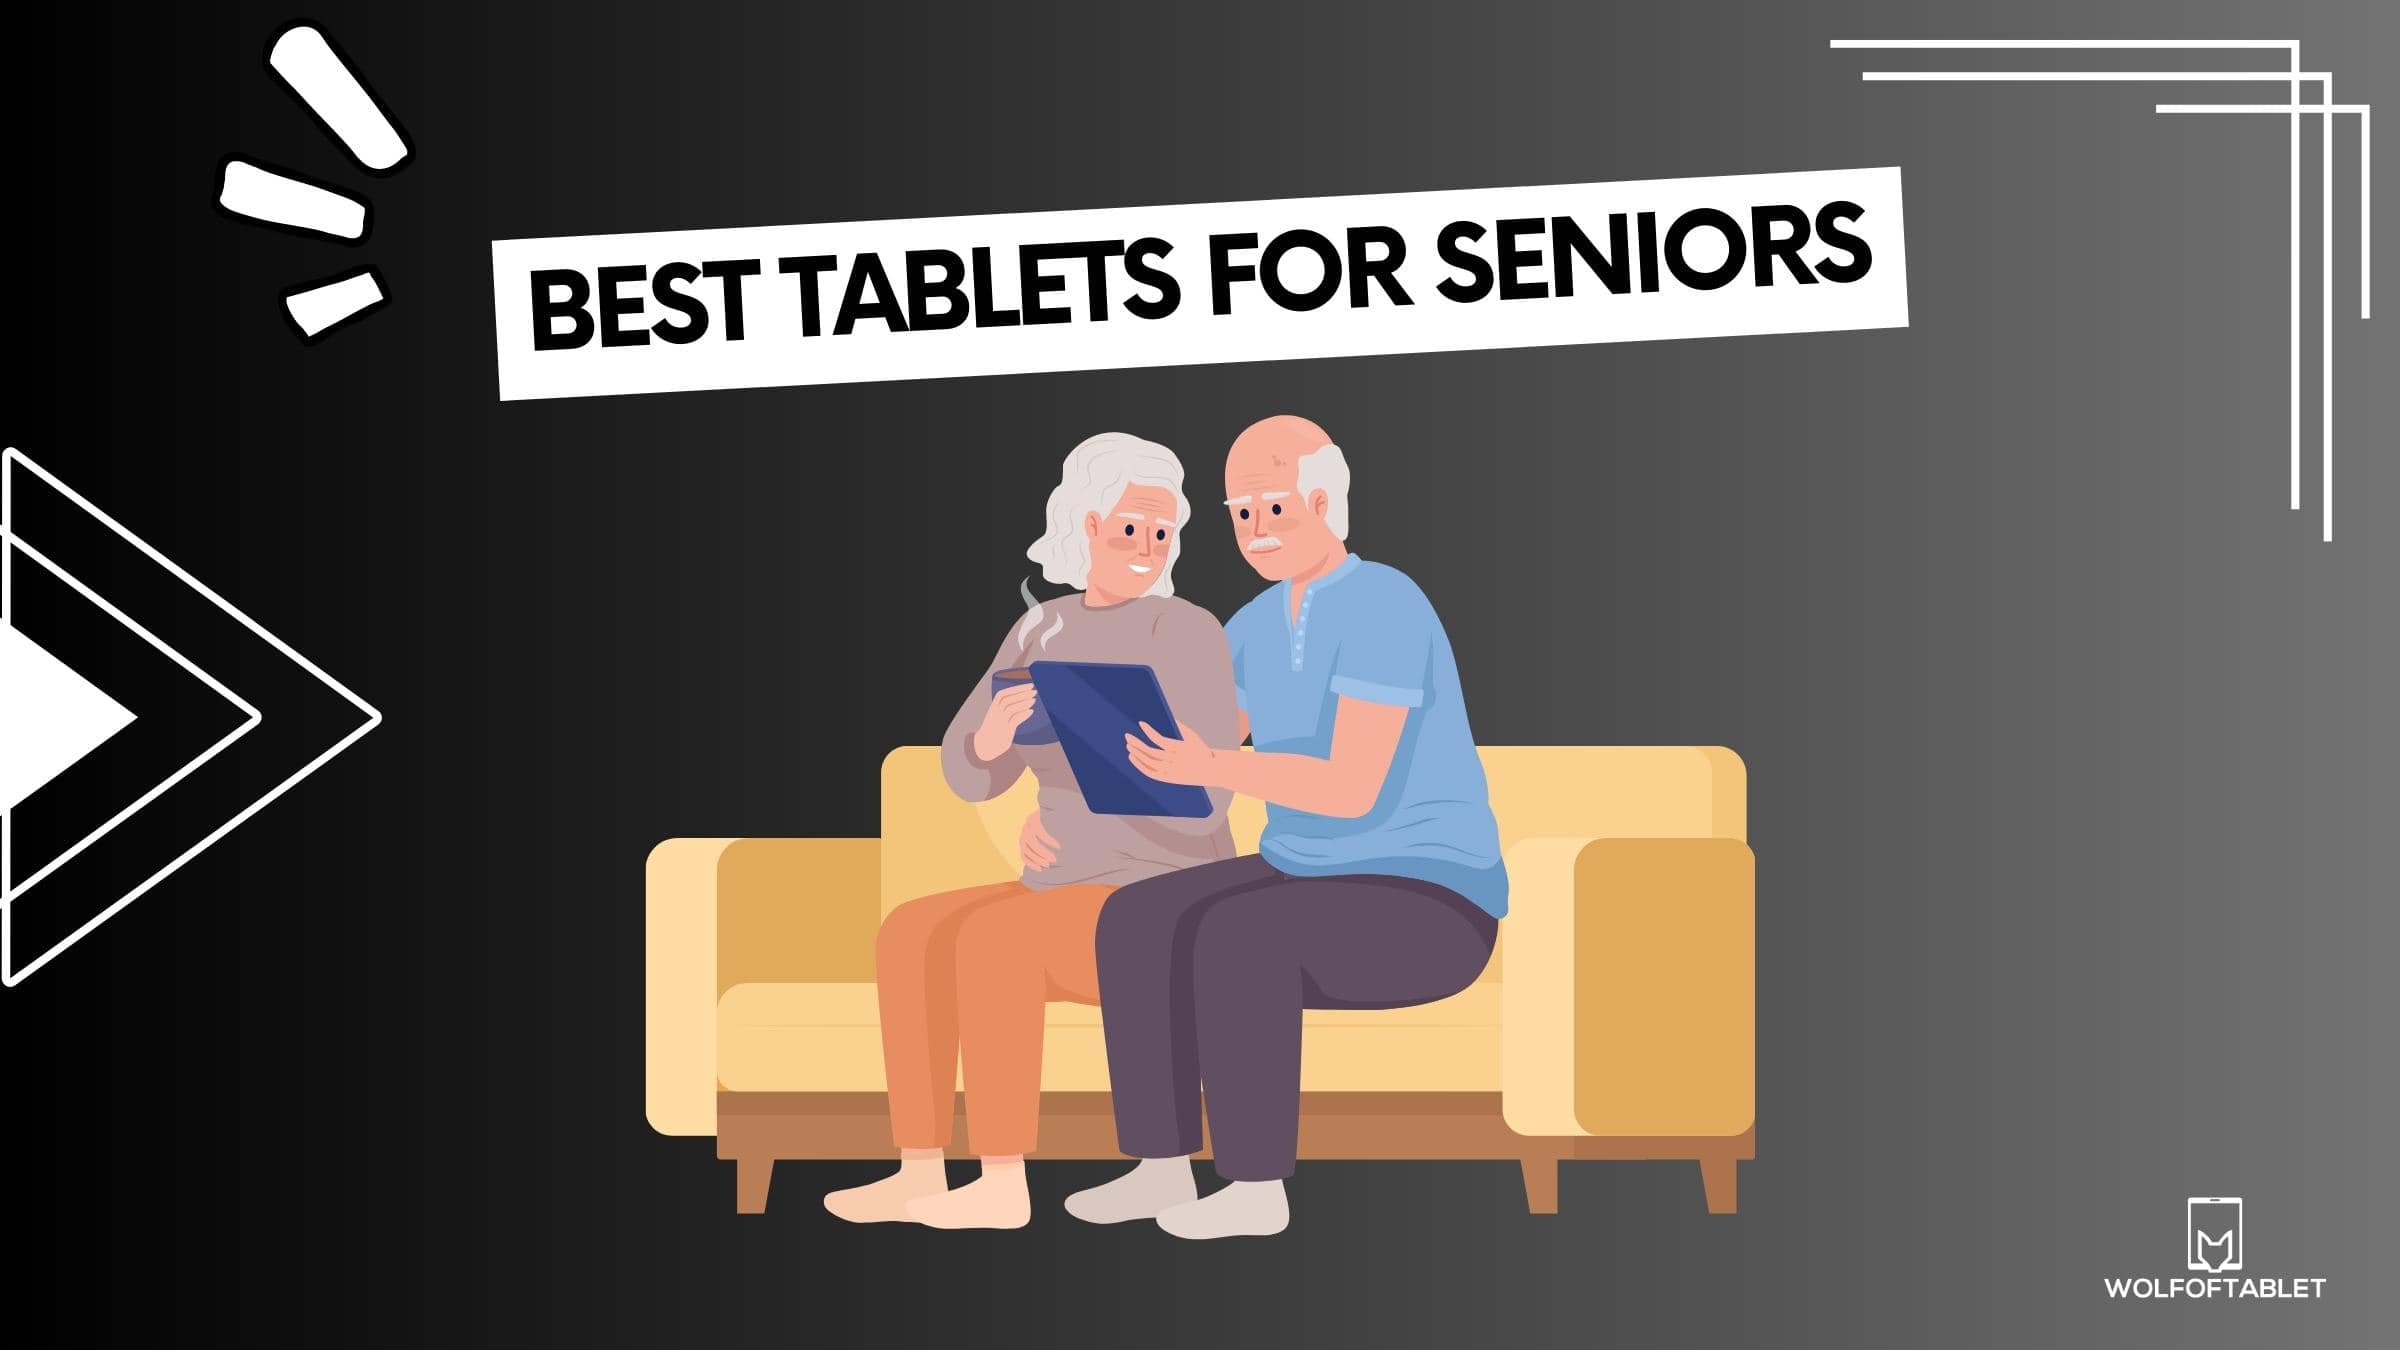 looking for best tablets for seniors - here's our top list